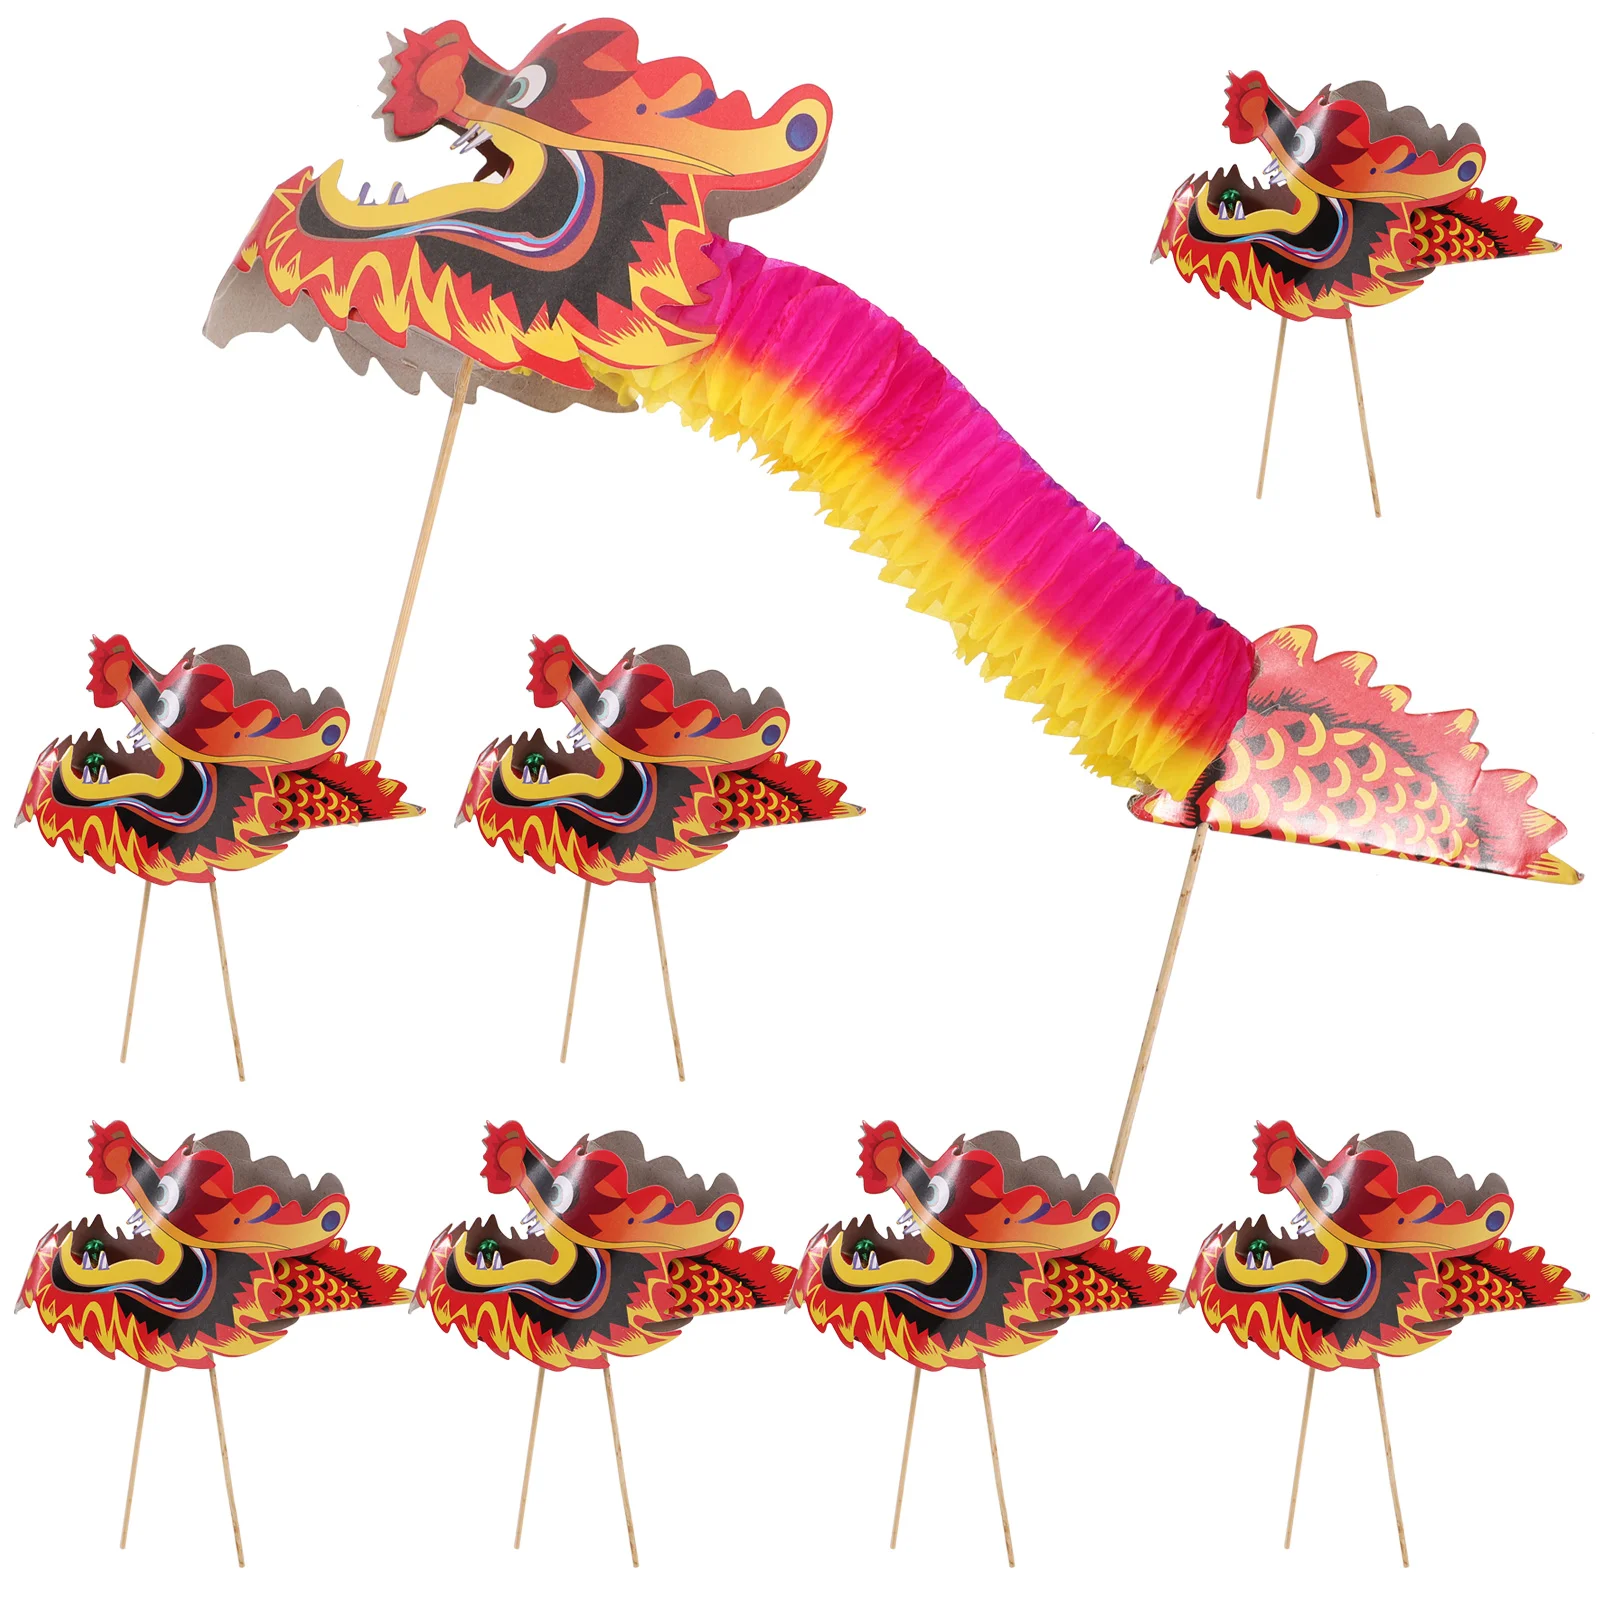 

8 Pcs Dragon Head Props Household Decor Party Game Photo New Year Paper Hand Held Child Handheld Decors Shooting